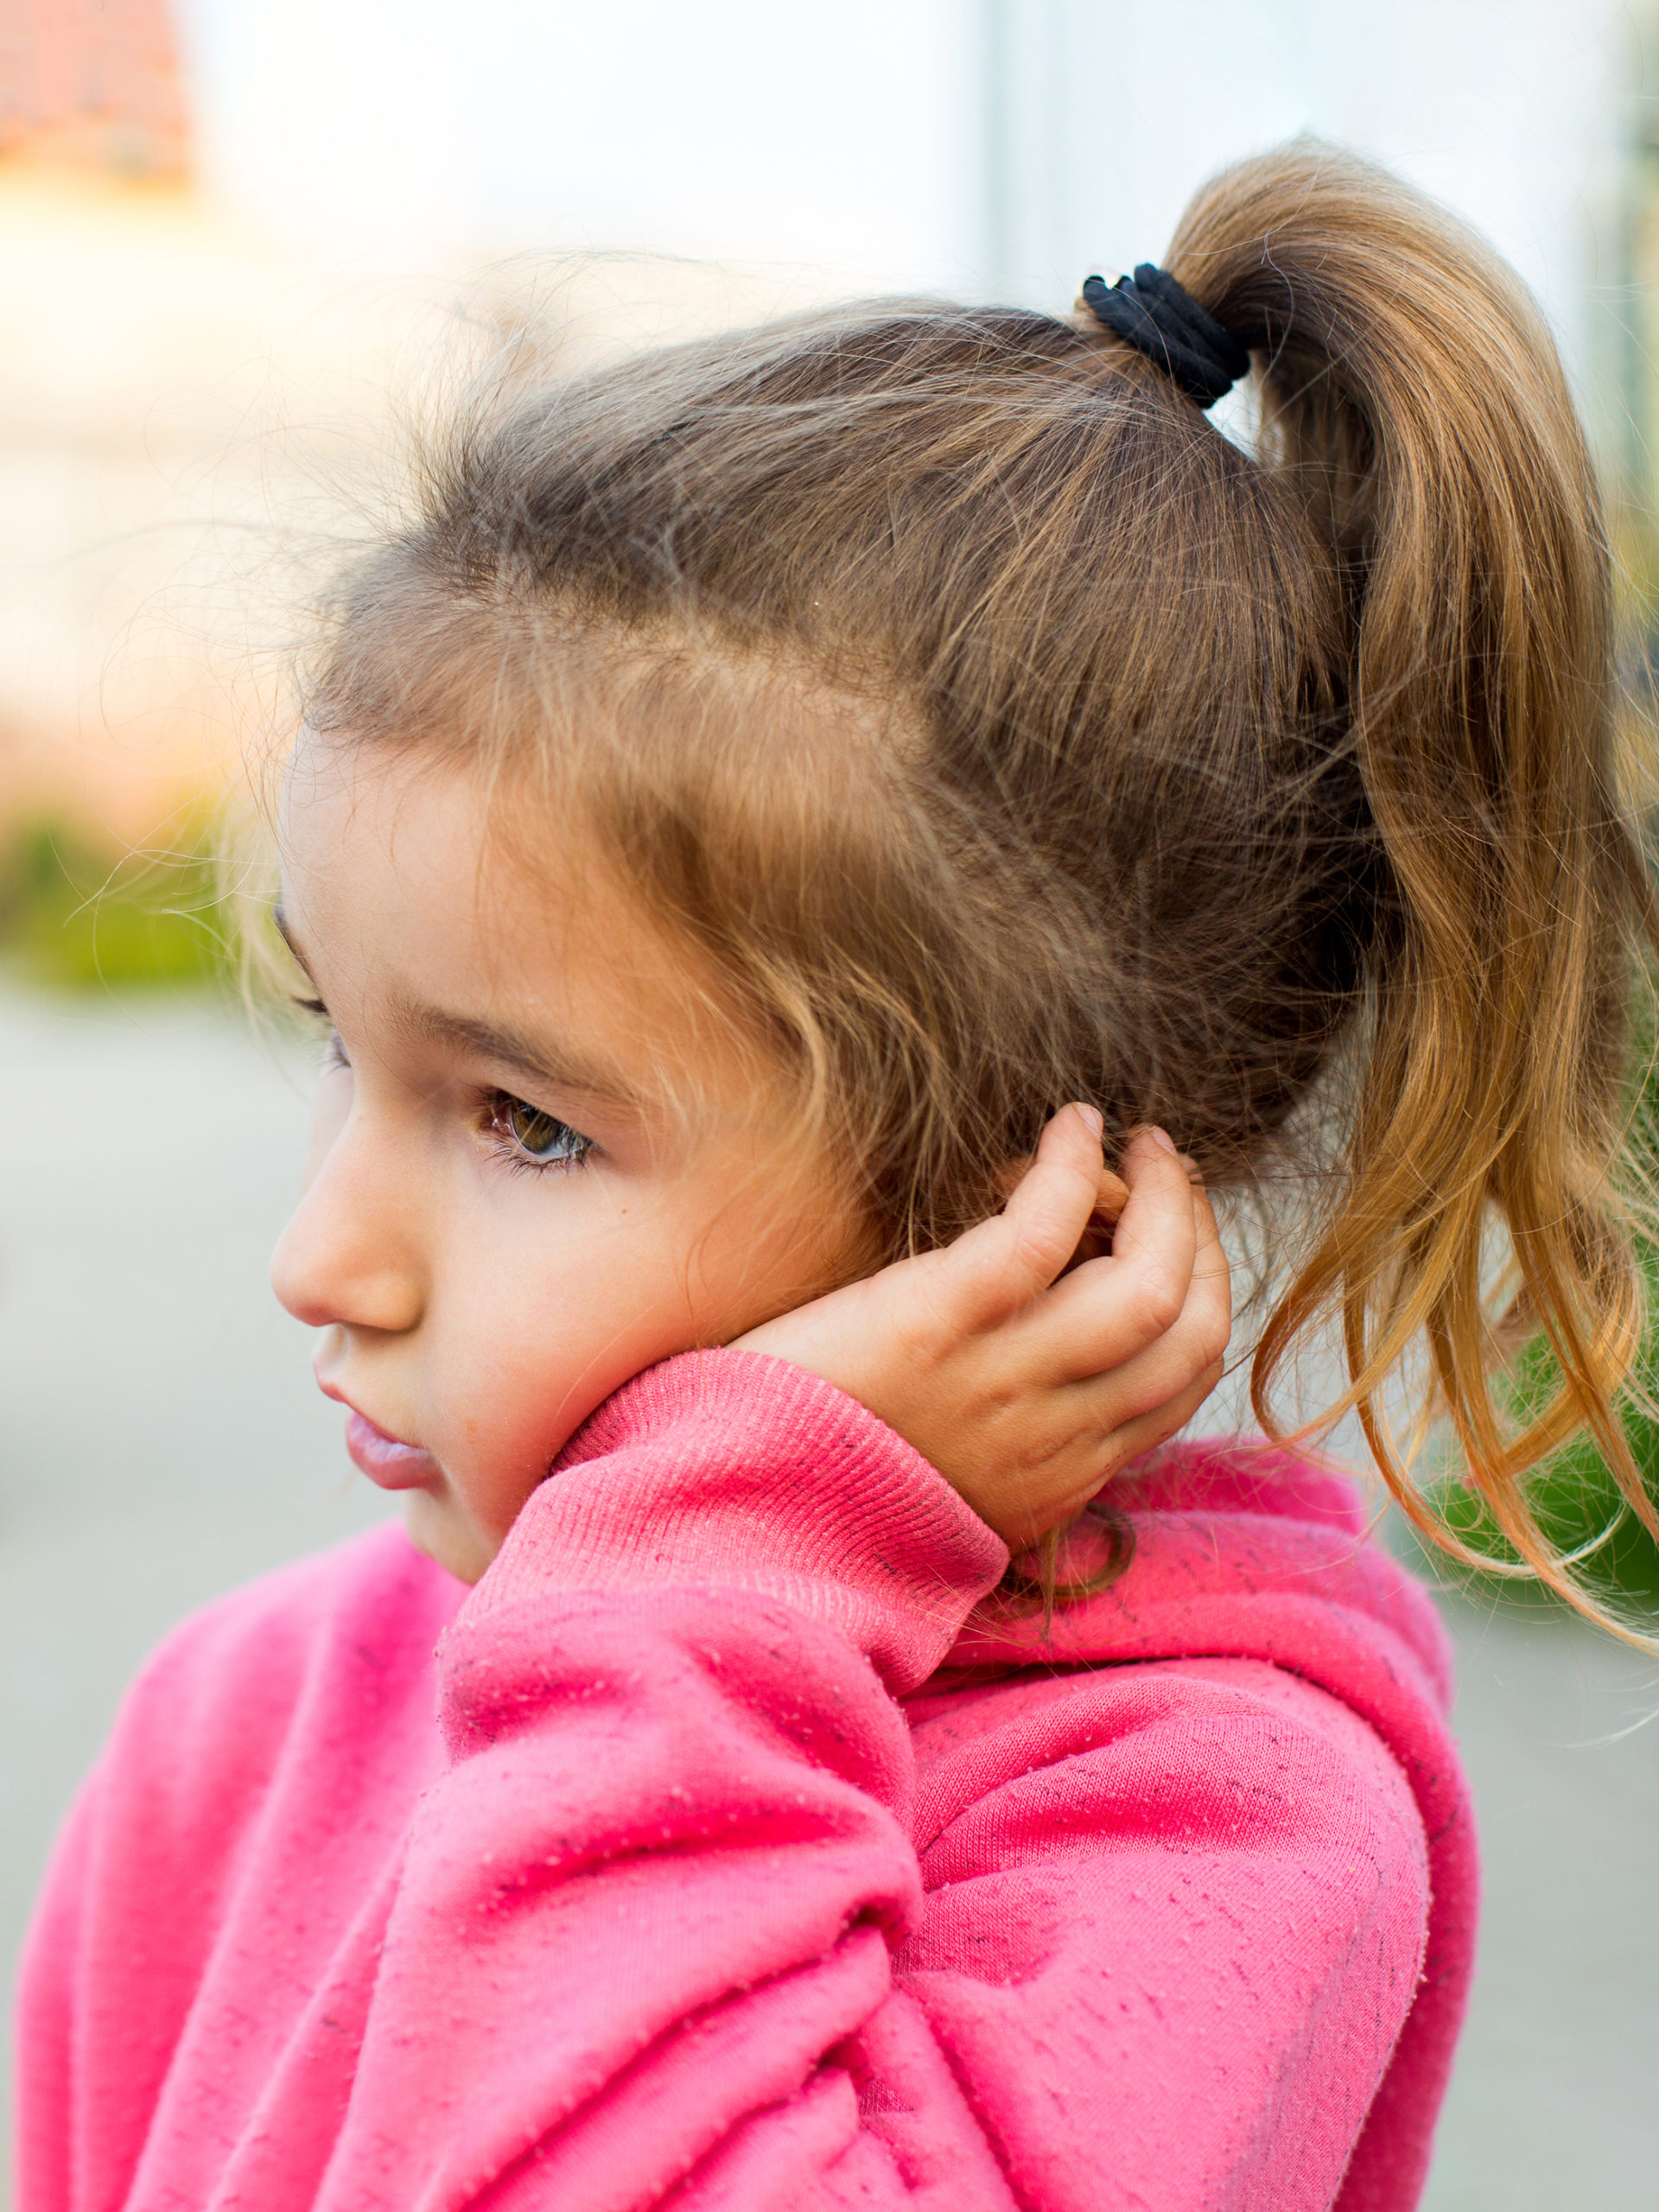 Swimmer’s ear (otitis externa) and kids: What parents should know